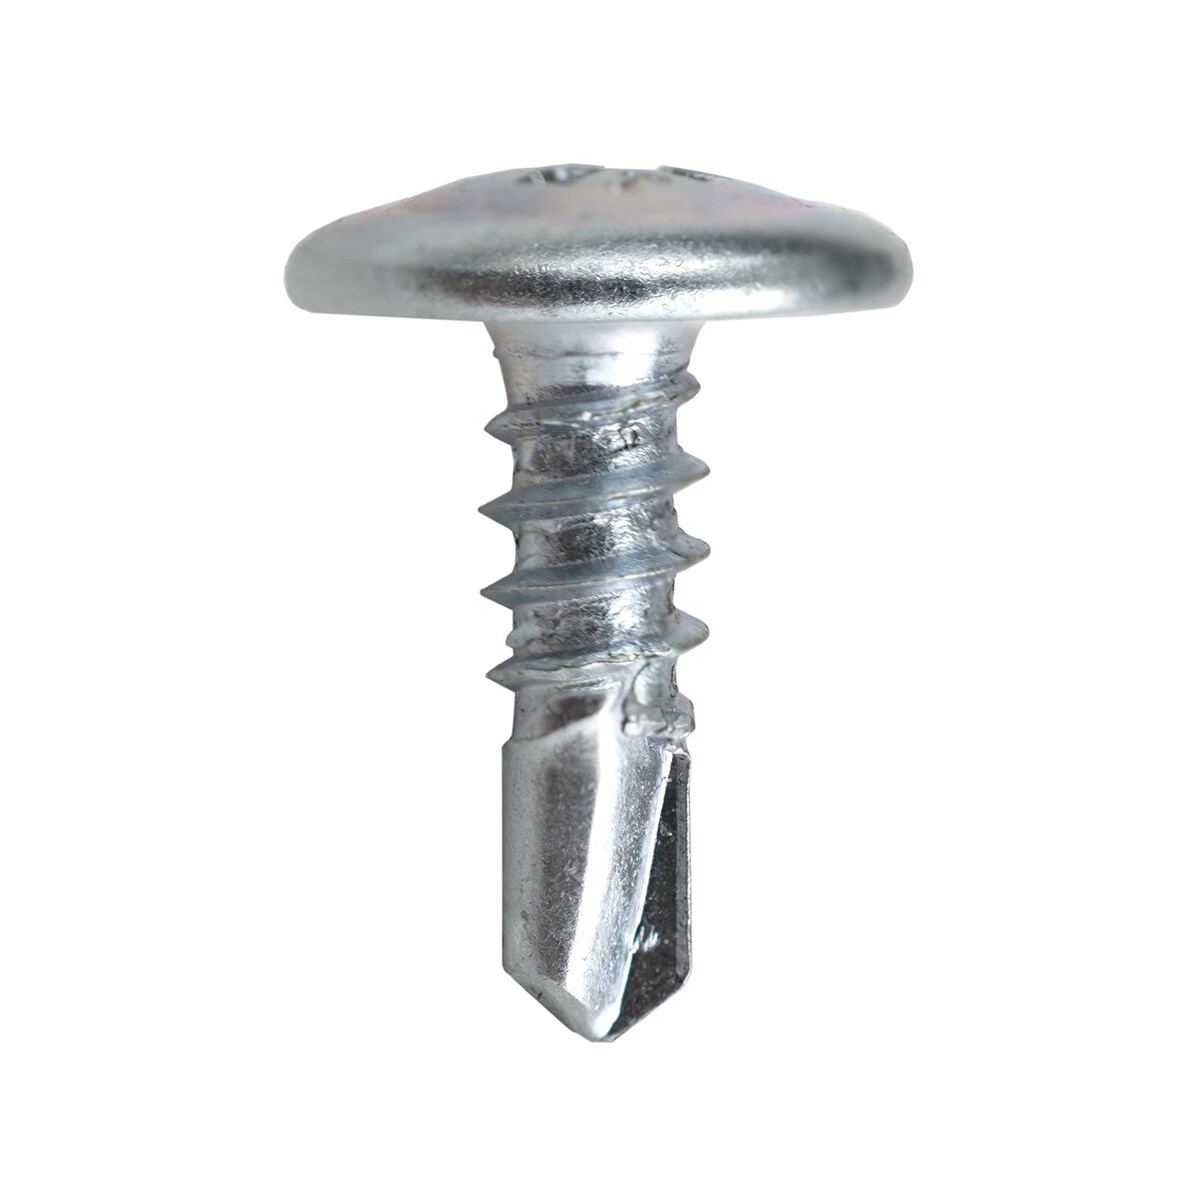 The Hillman GroupThe Hillman Group 35267 Truss Washer Head Phillips Lath Self-Drilling Screw 8 x 1/2 100-Pack 